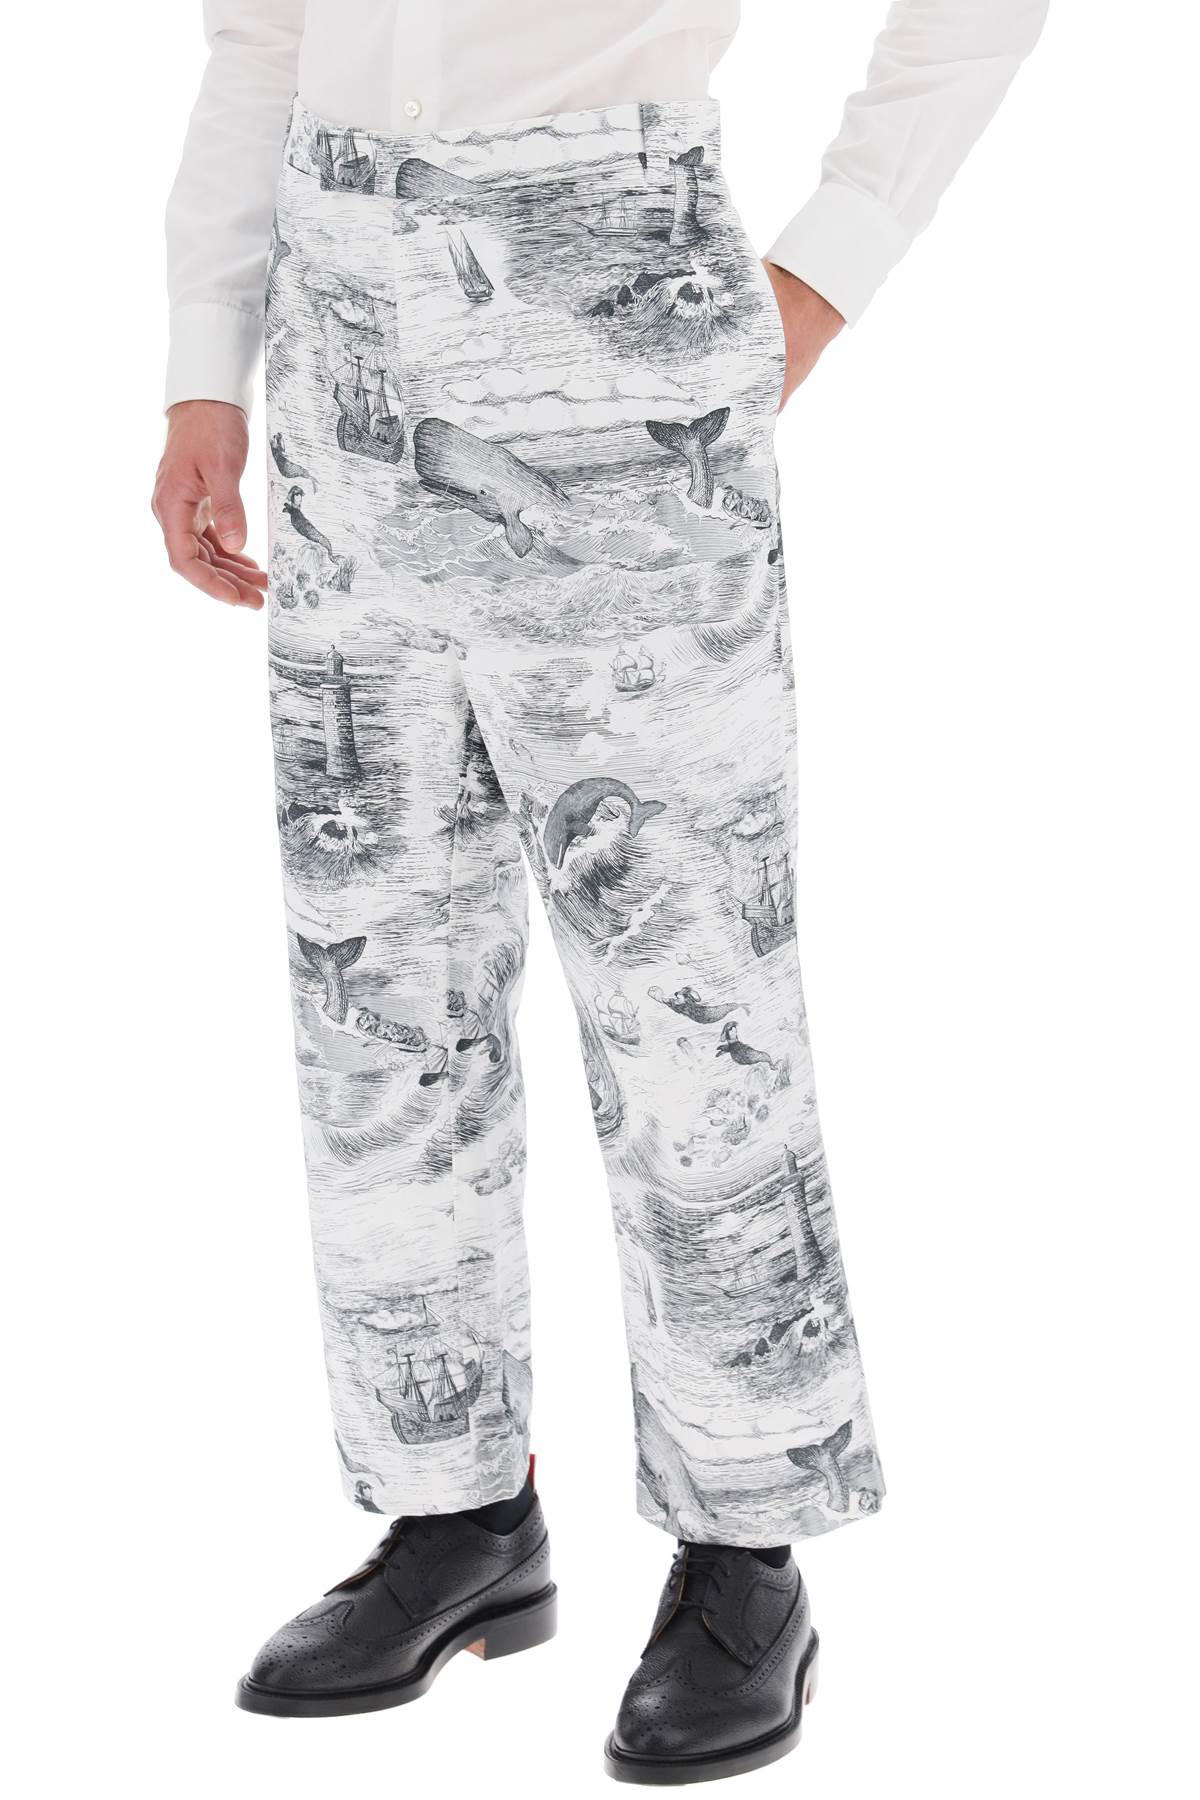 Thom browne cropped pants with 'nautical toile' motif-3